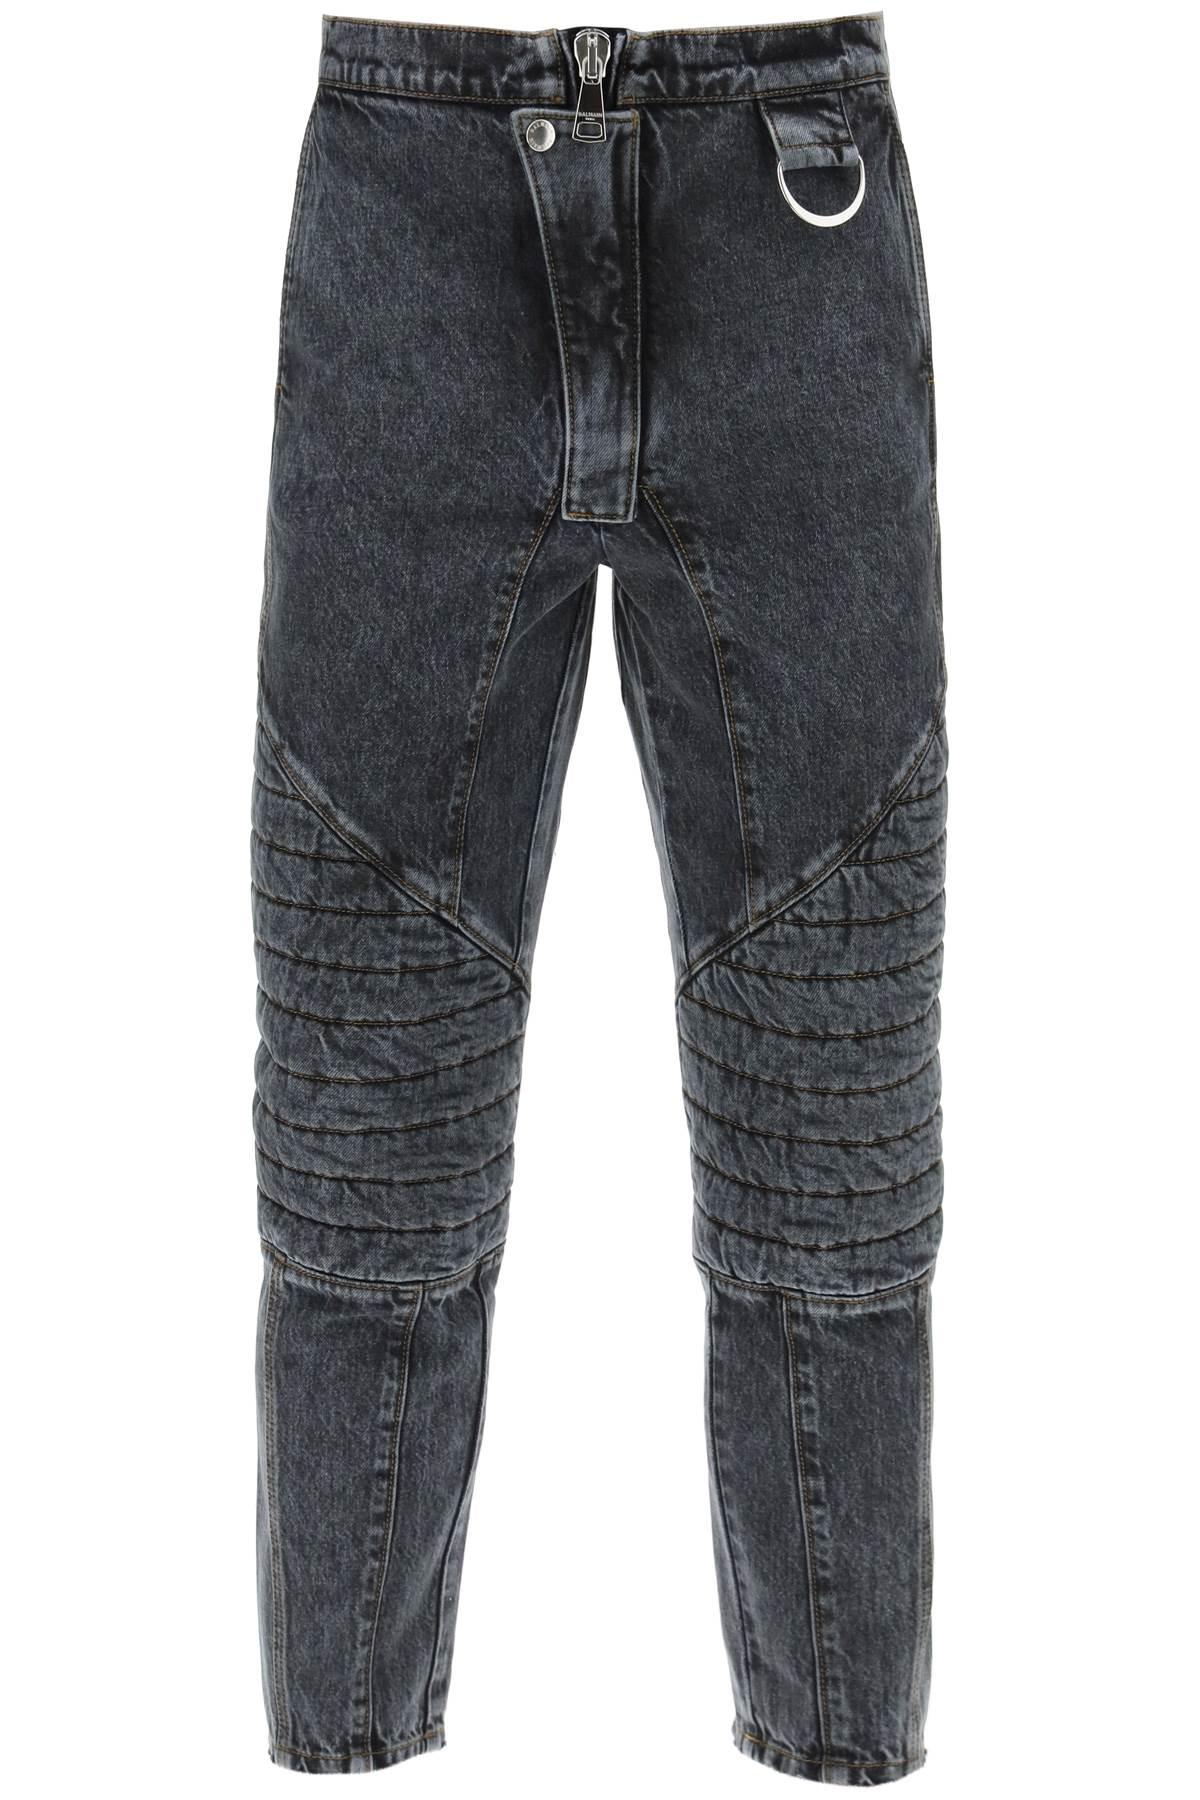 Balmain Jeans With Quilted And Padded Inserts |